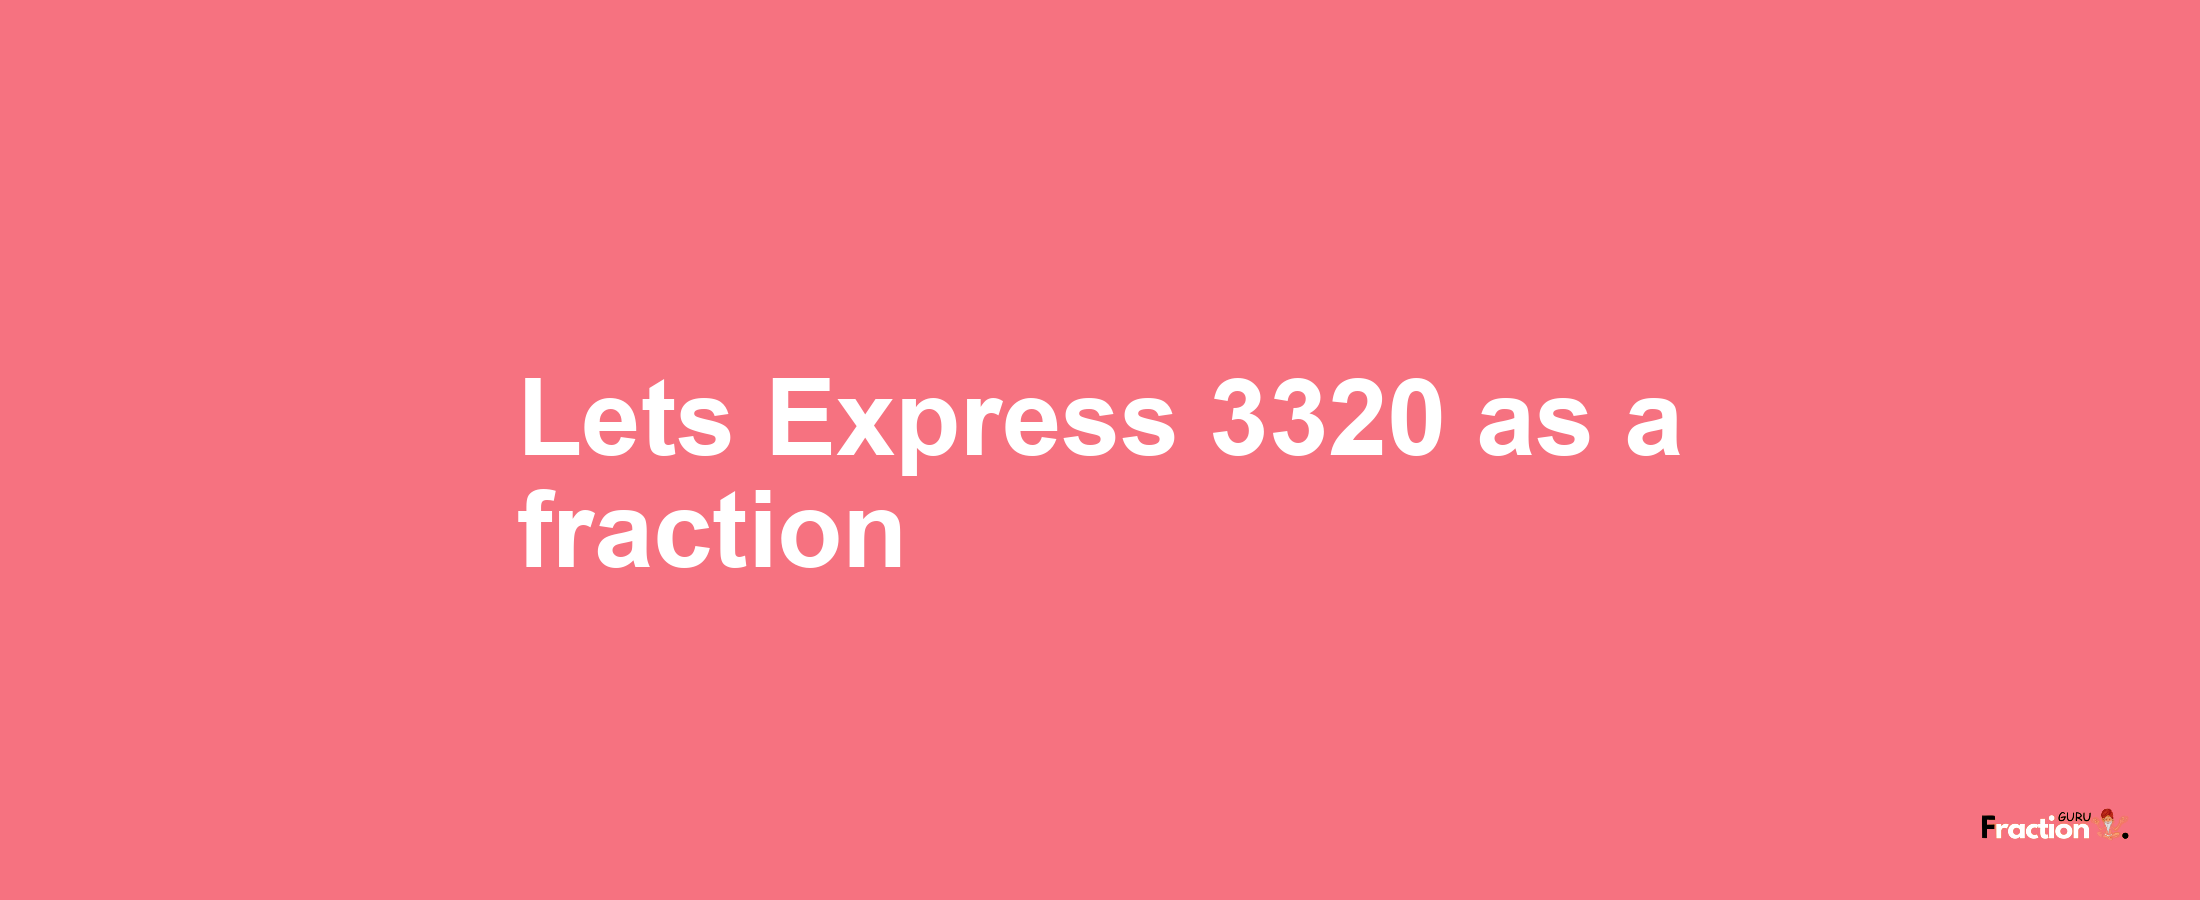 Lets Express 3320 as afraction